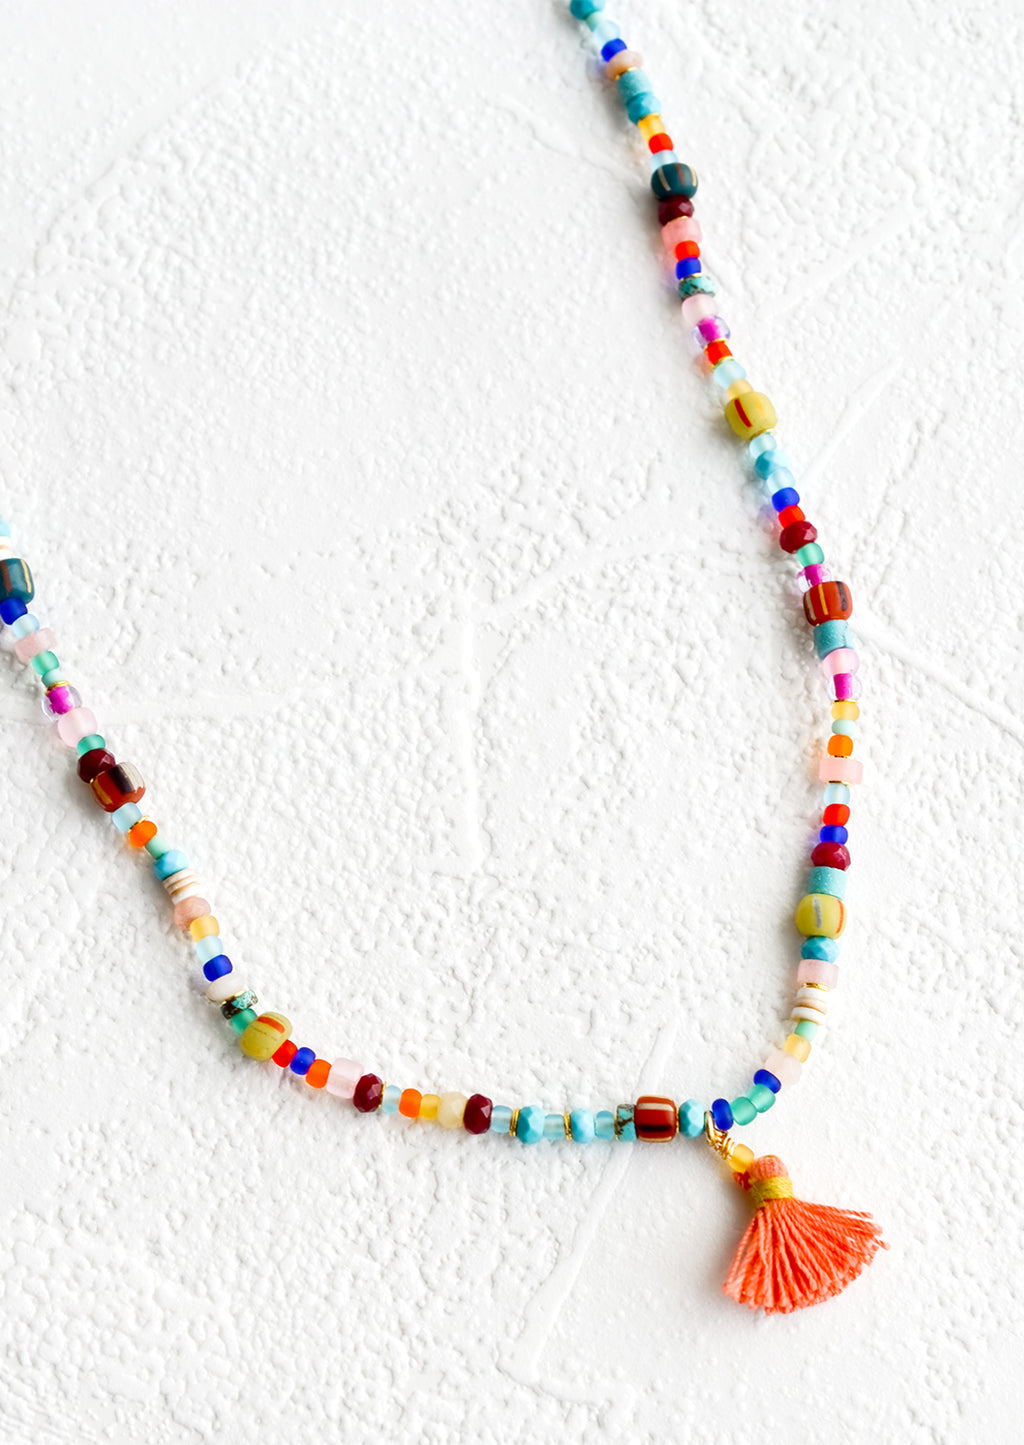 2: Colorful beaded necklace with peach tassel at center.